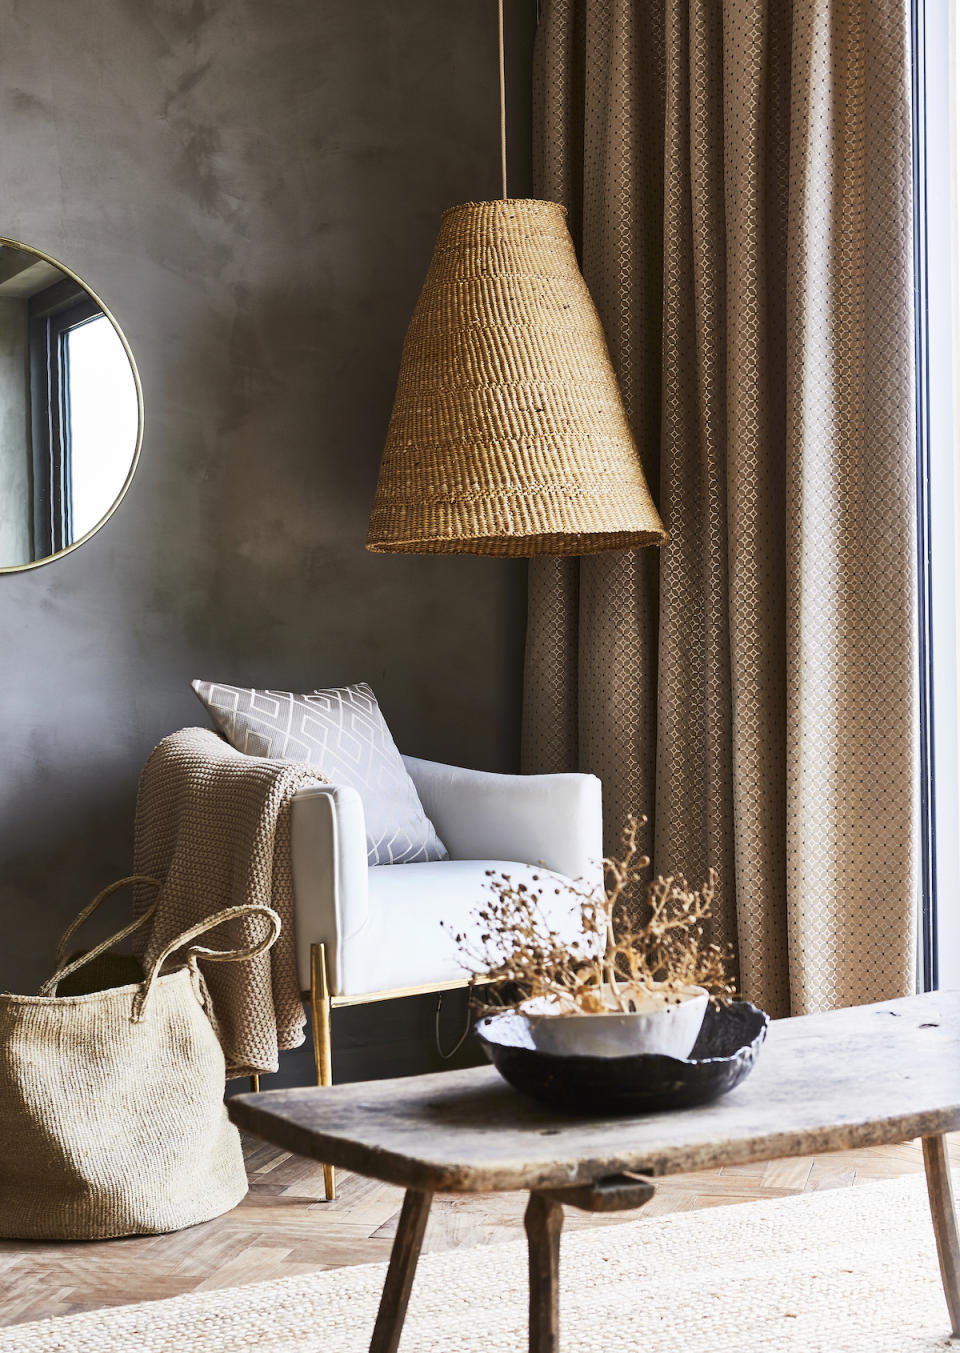 17. Love rustic style? Add a textured curtain